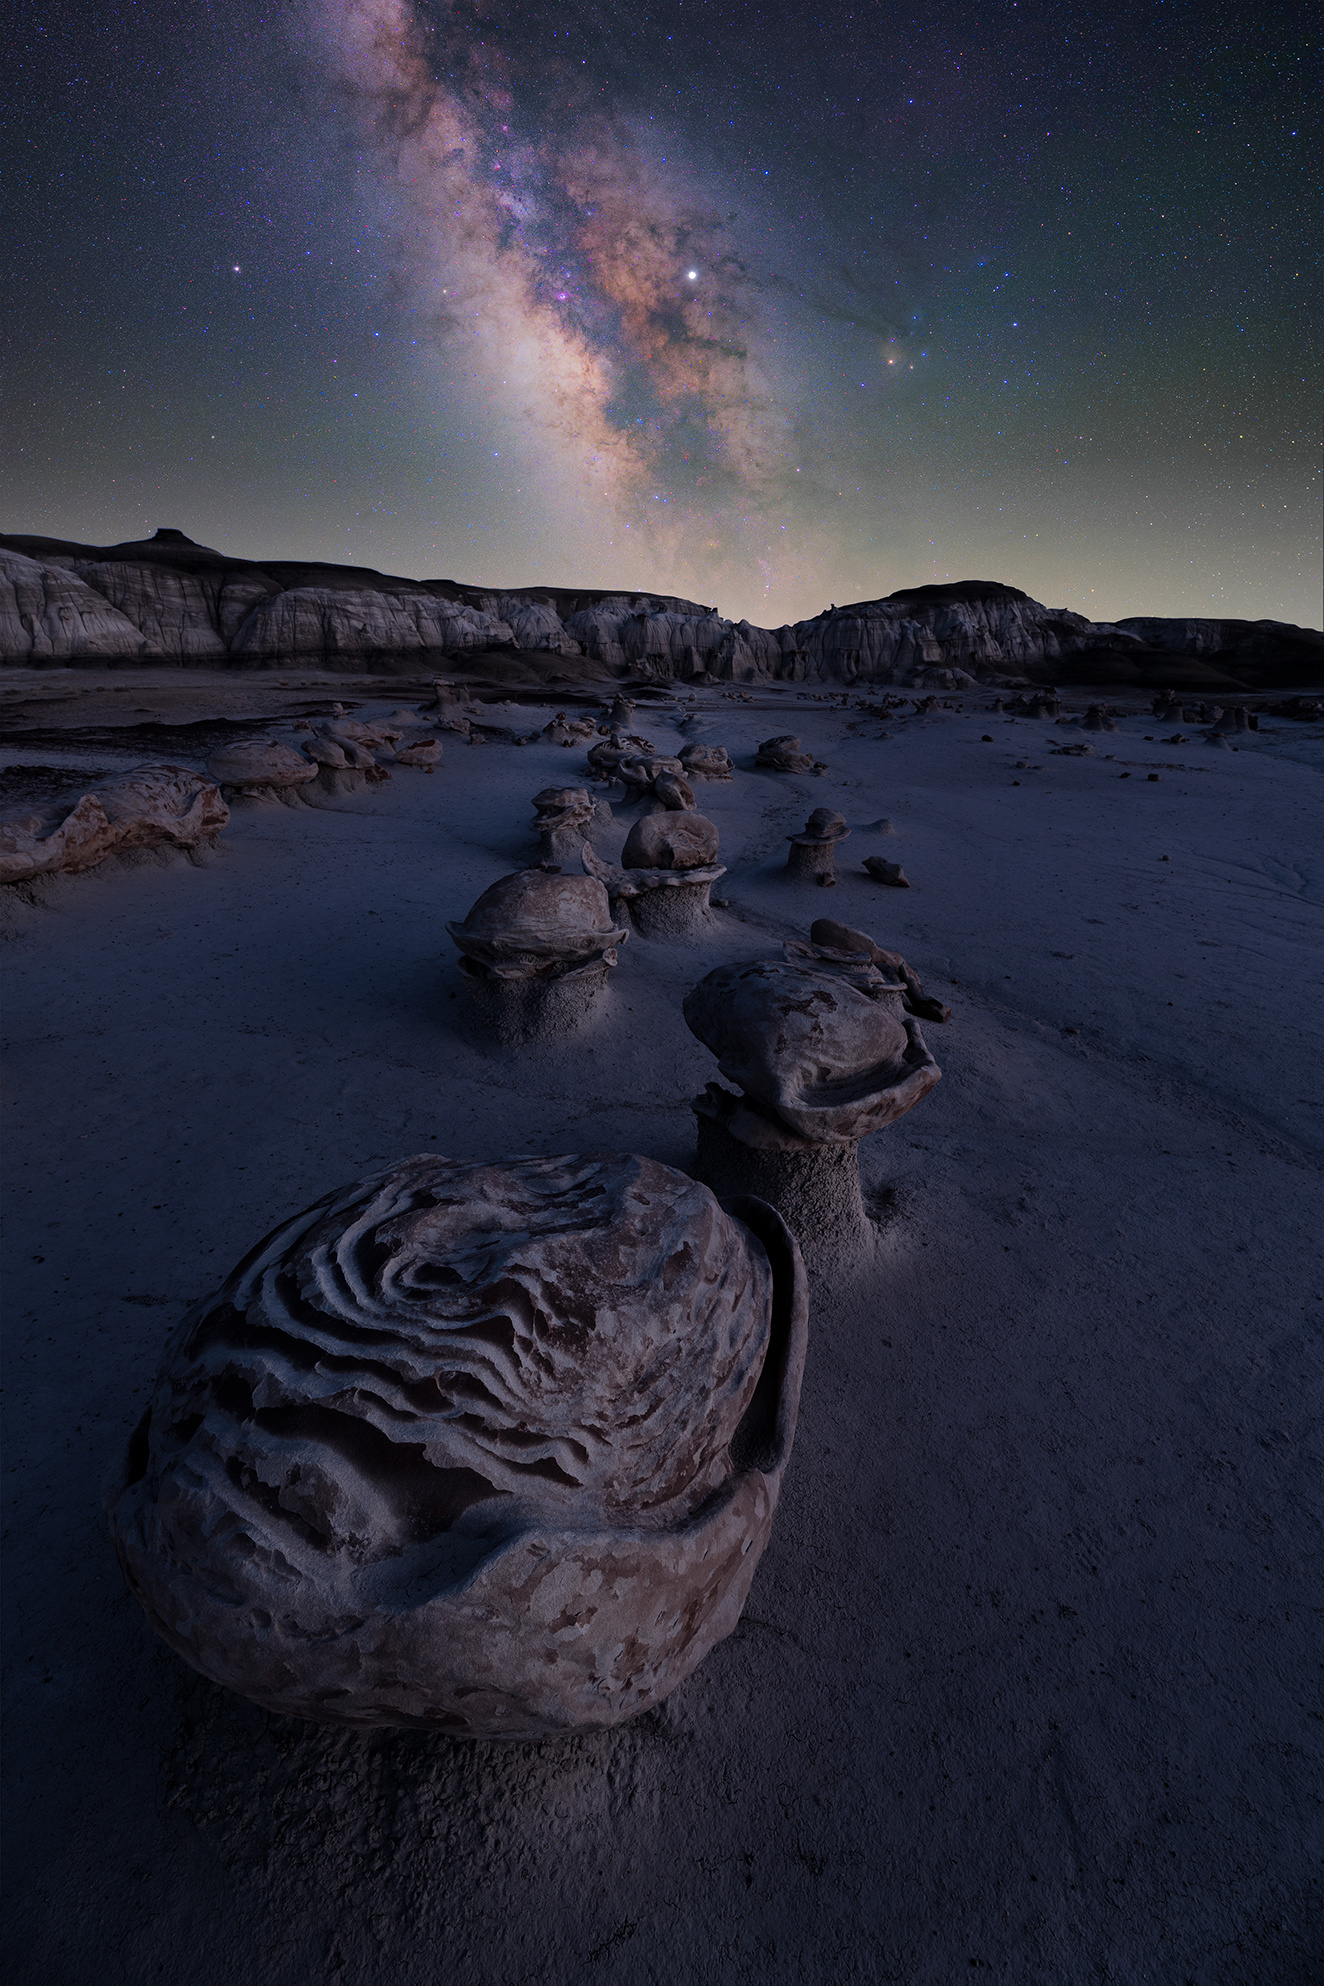 Bisti Badlands, Milky Way spectacle, Otherworldly formations, Nighttime photographic gem, 1330x1990 HD Handy